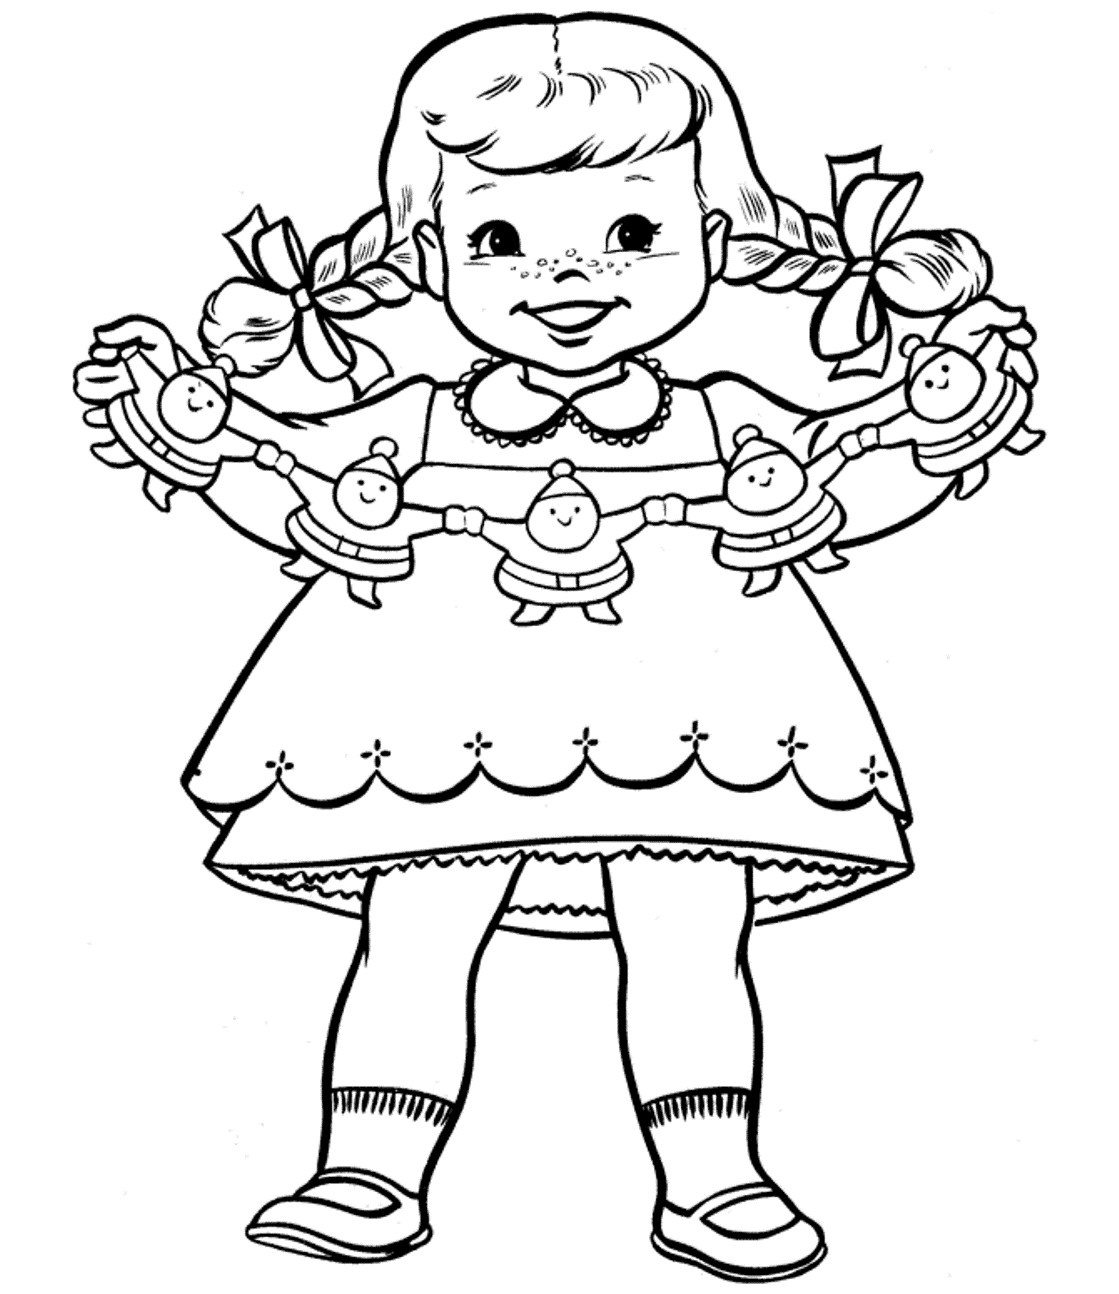 Little Girls Coloring Pages
 Coloring Pages Girl Coloring Pages Coloring Pages For